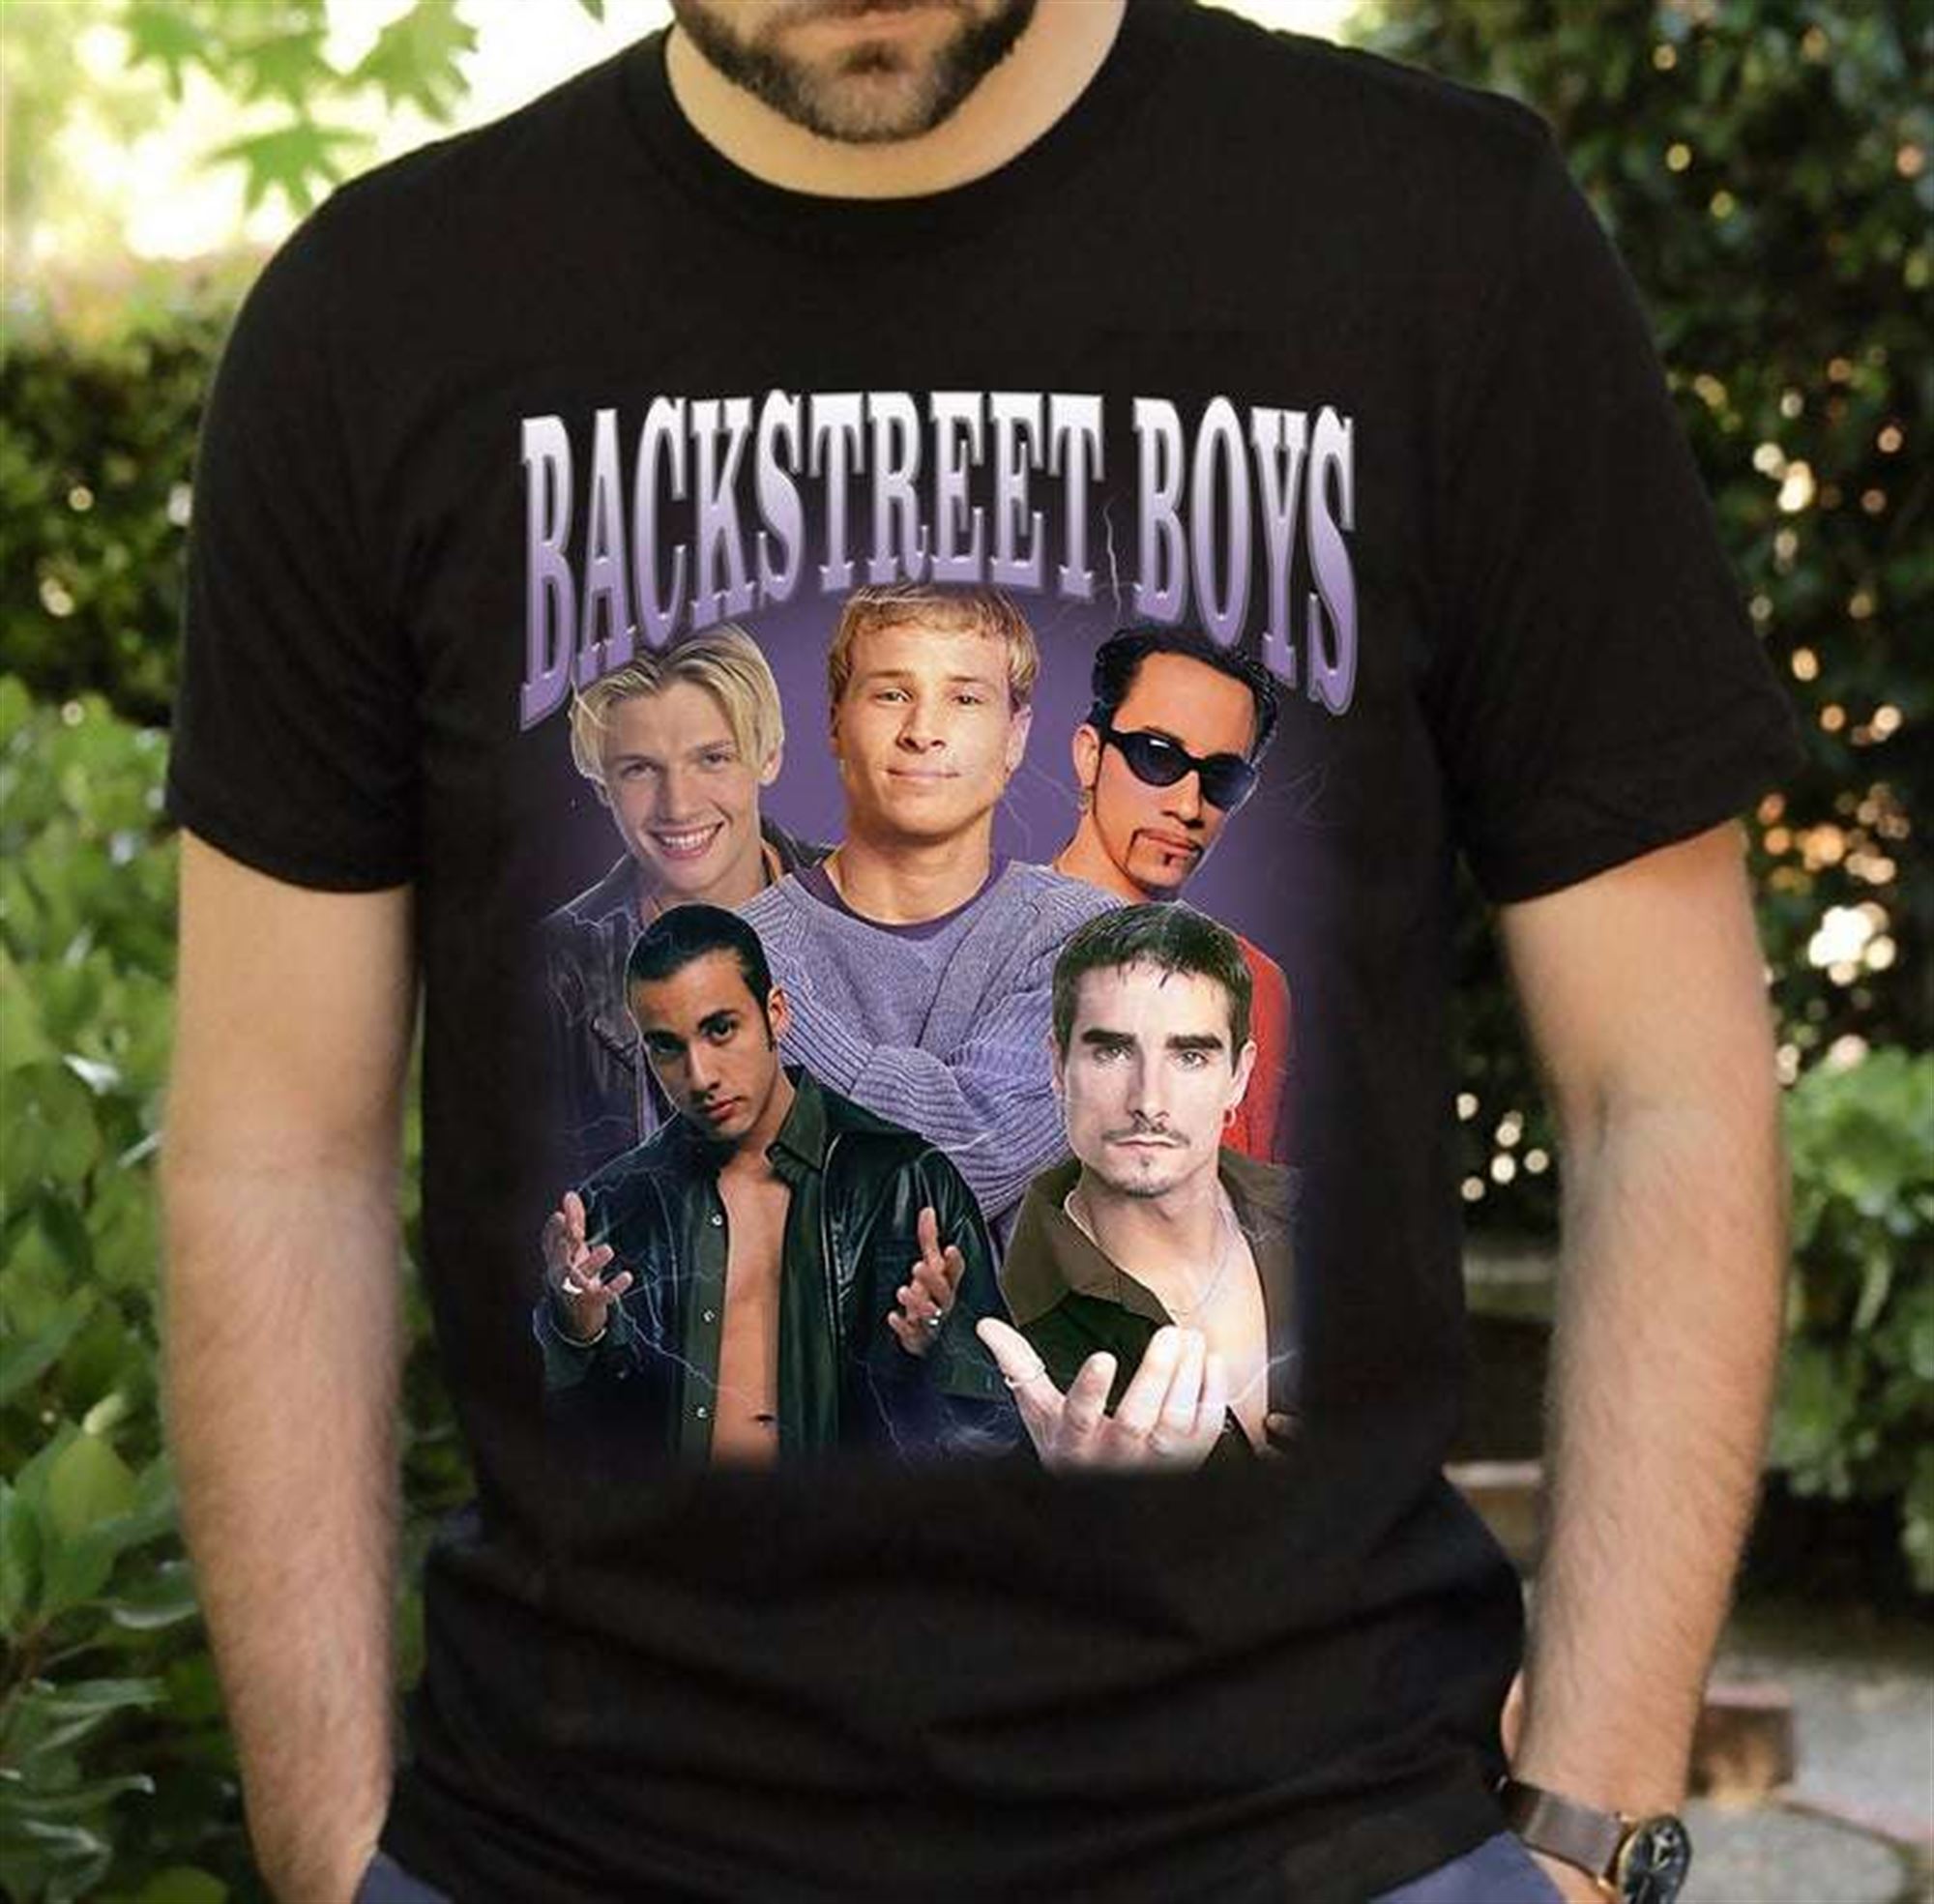 Backstreet Boys Band Vintage 90s Music T Shirt Plus Size Up To 5xl